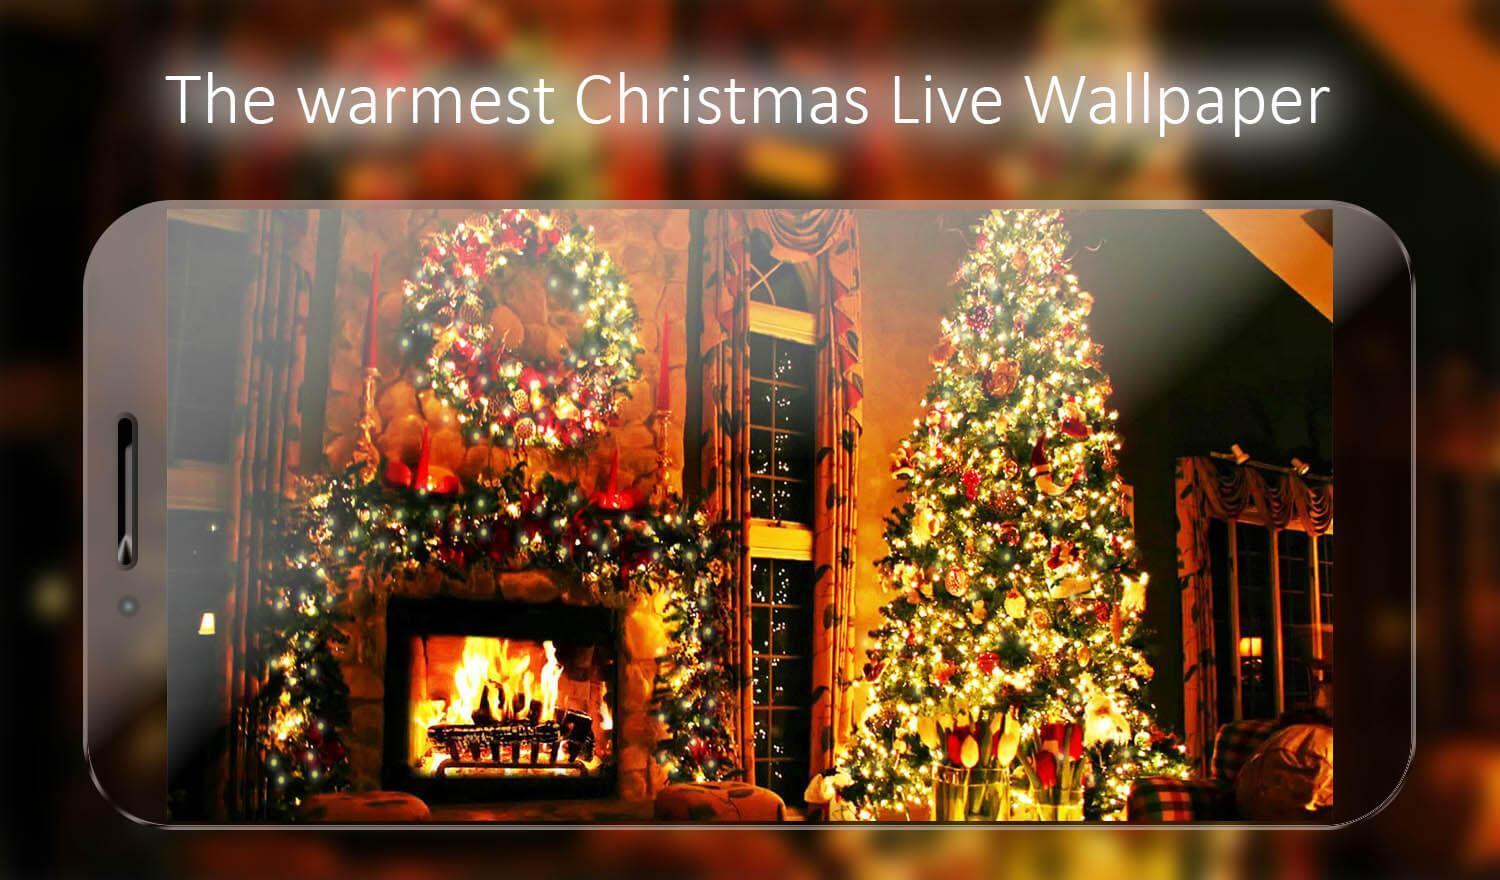 Christmas Fireplace Live Wallpaper for Android